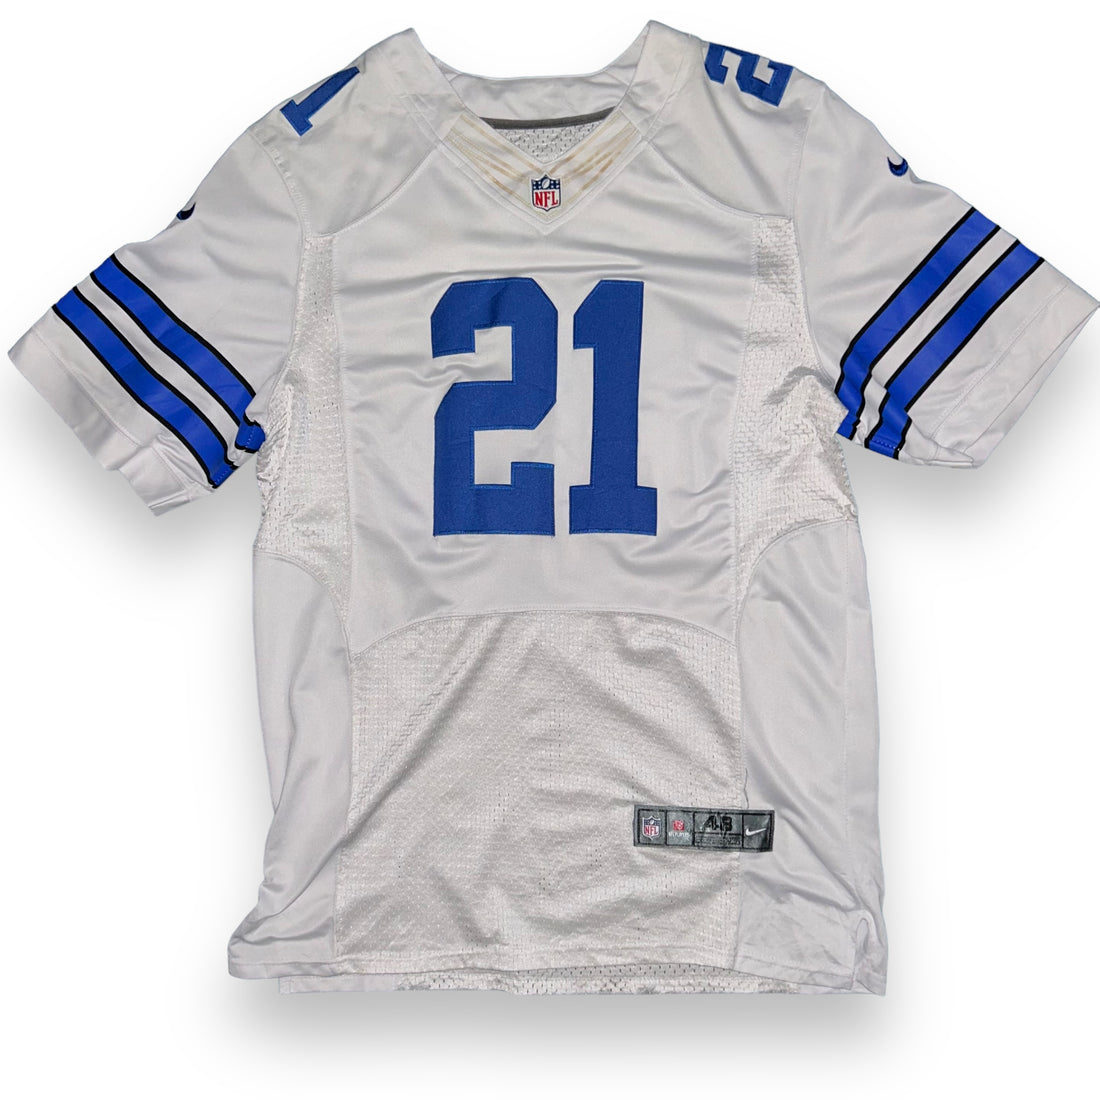 Jersey Indianopolis Colts NFL  (XL)